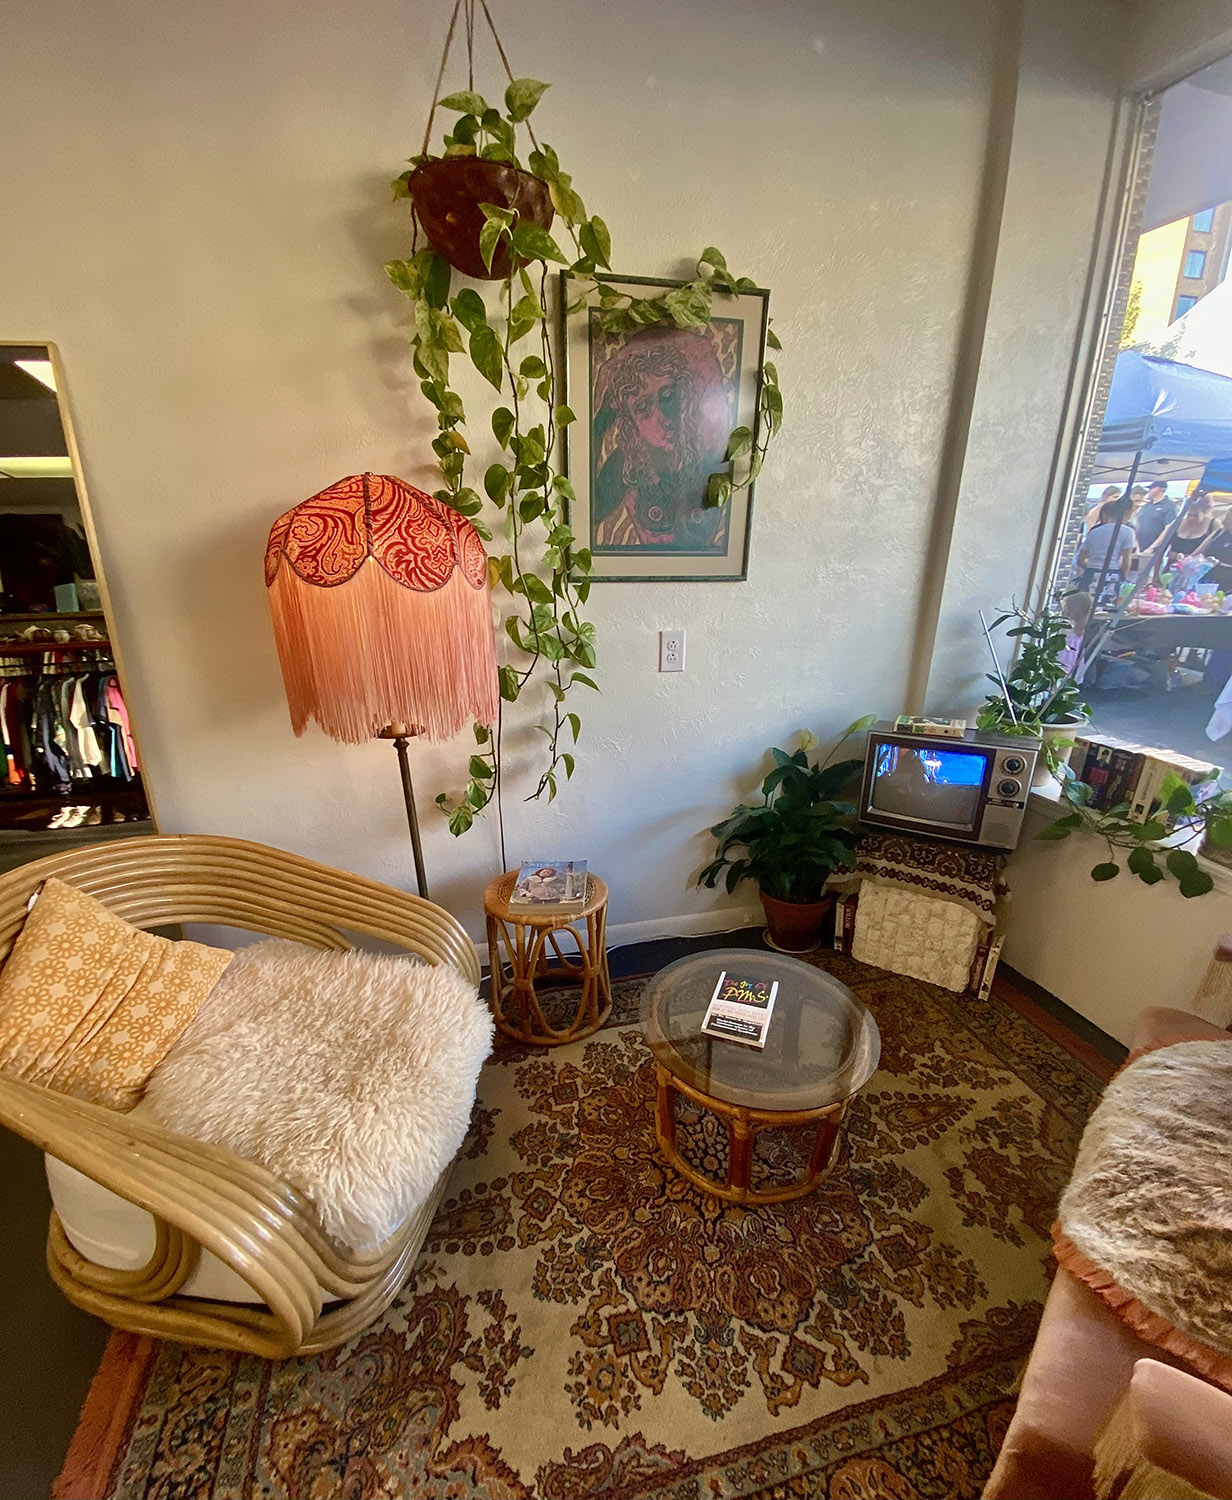 A cozy seating area inside a thrift shop. It has a tiny vintage television, a salmon-coloured floor lamp, and a plant hanging from the wall.